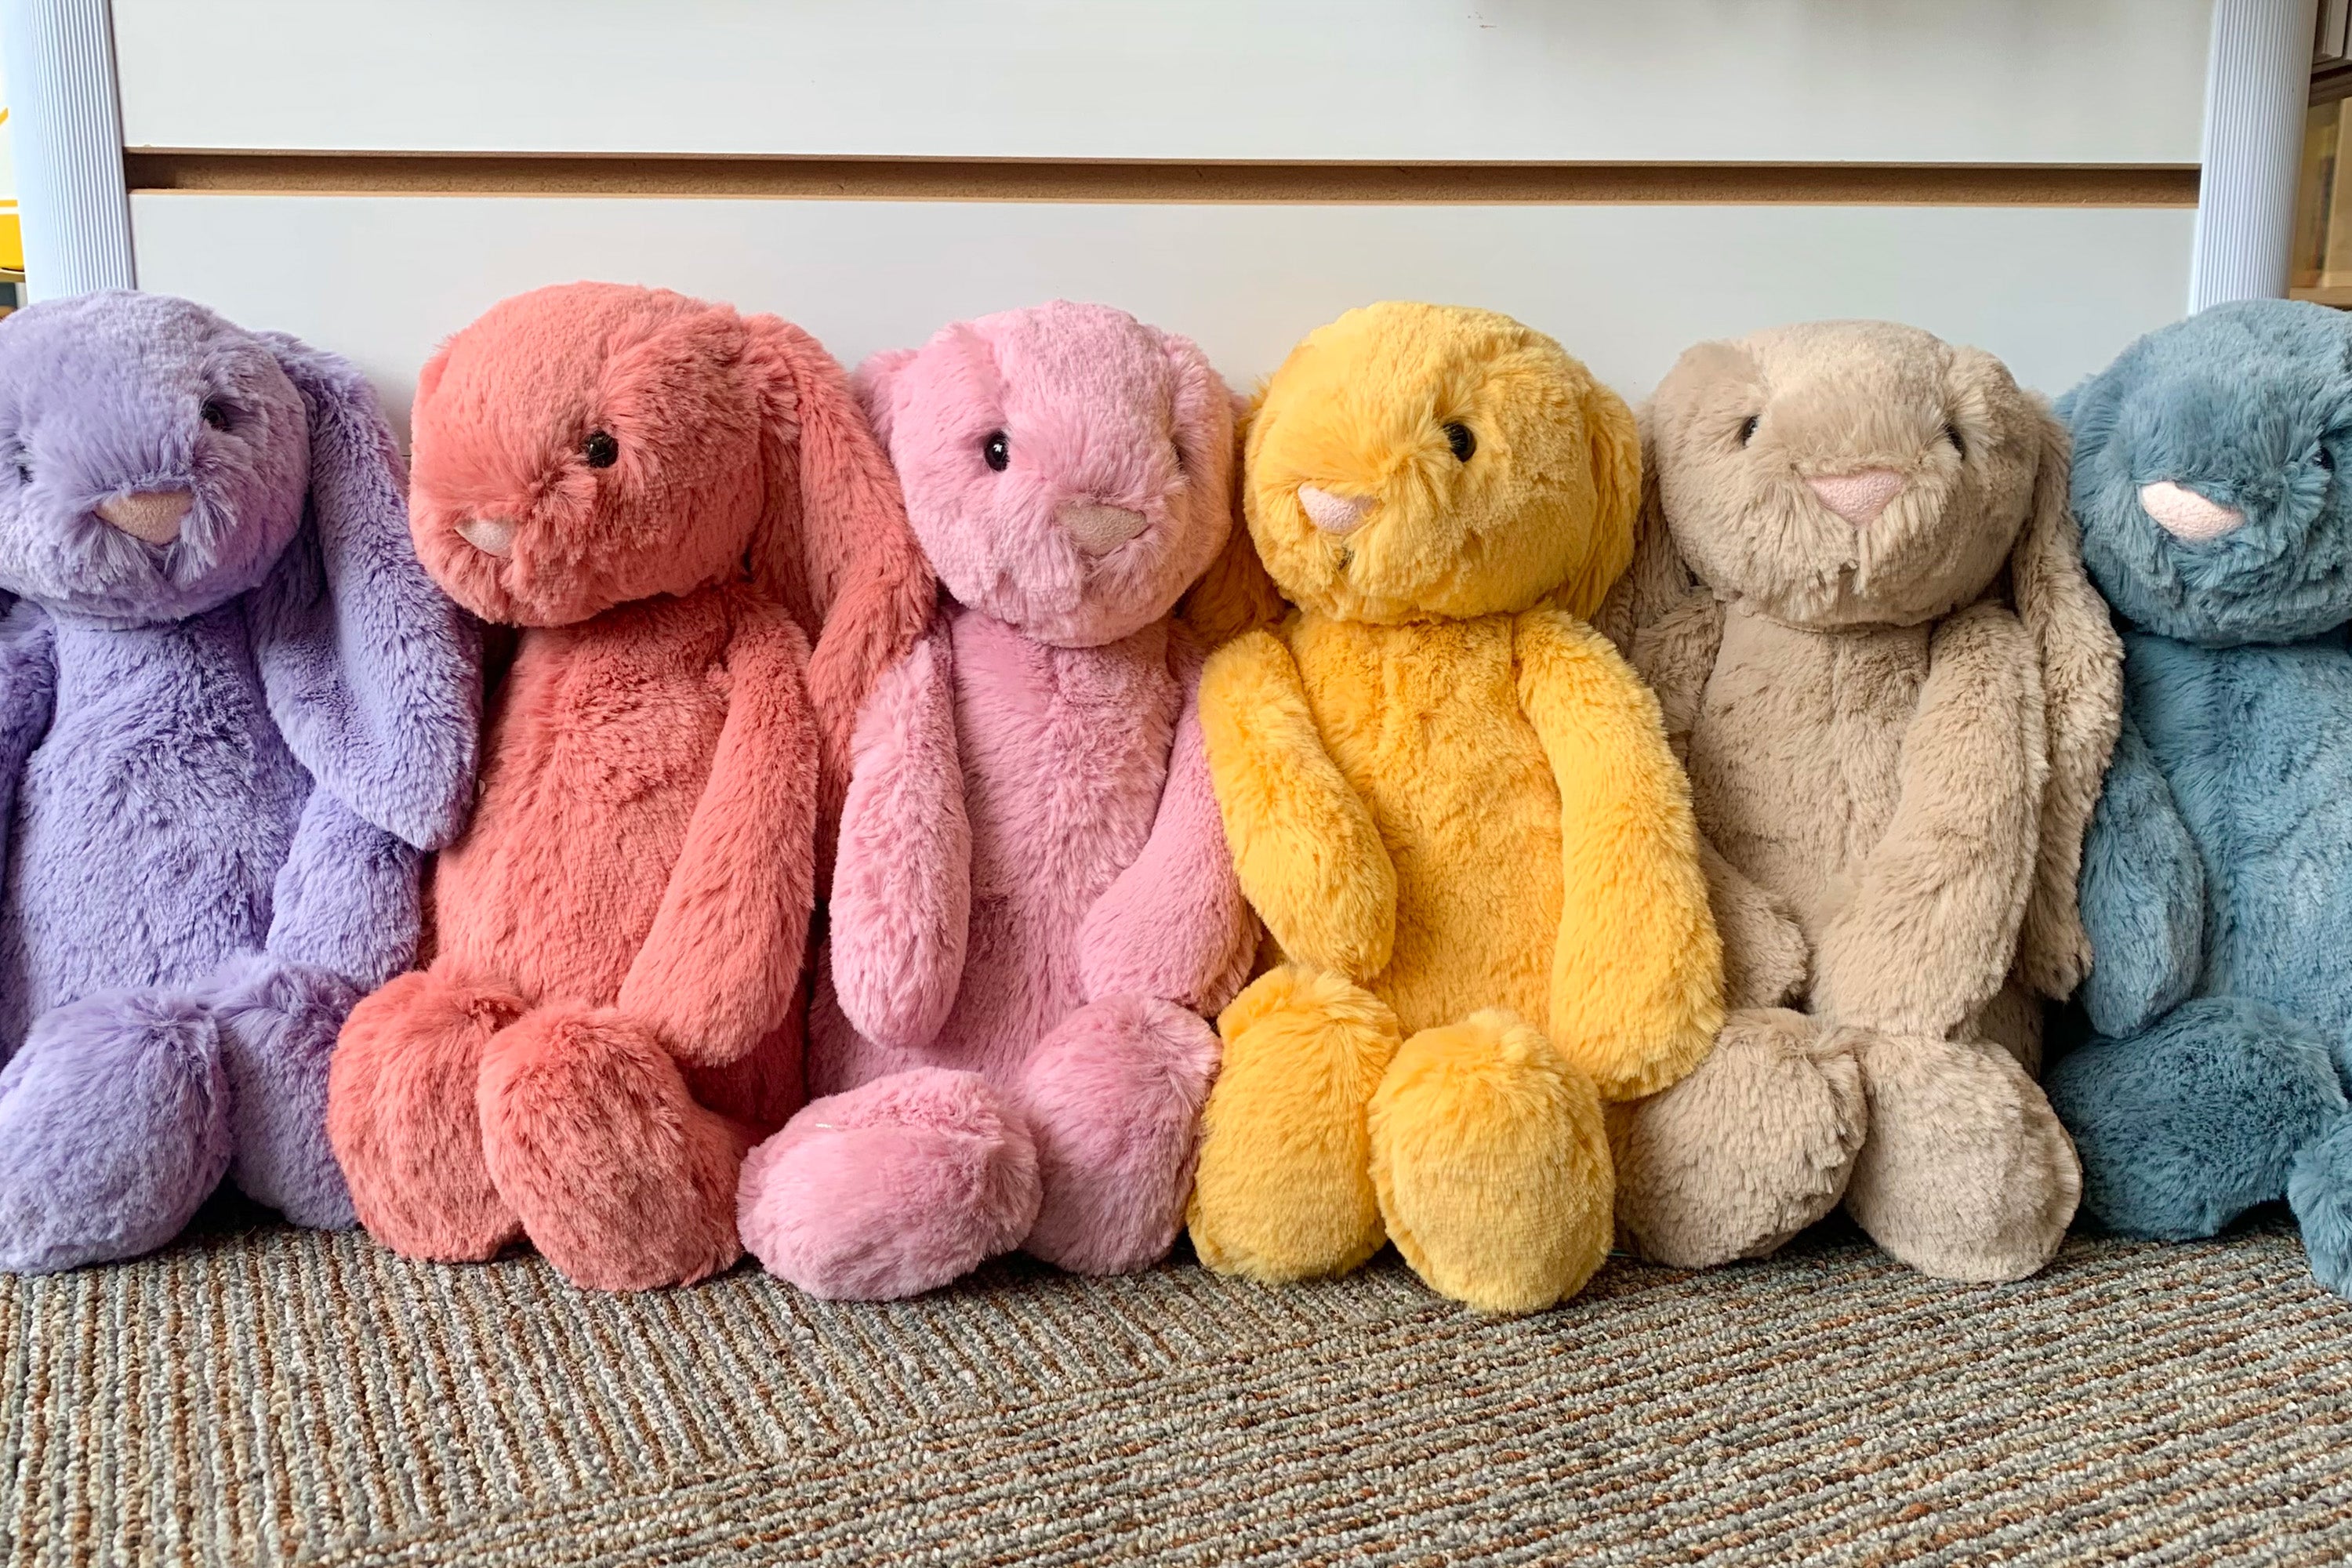 jellycat bashful bunnies in different colors, from left to right: violet, sorrel, pink, yellow, beige, dusky blue